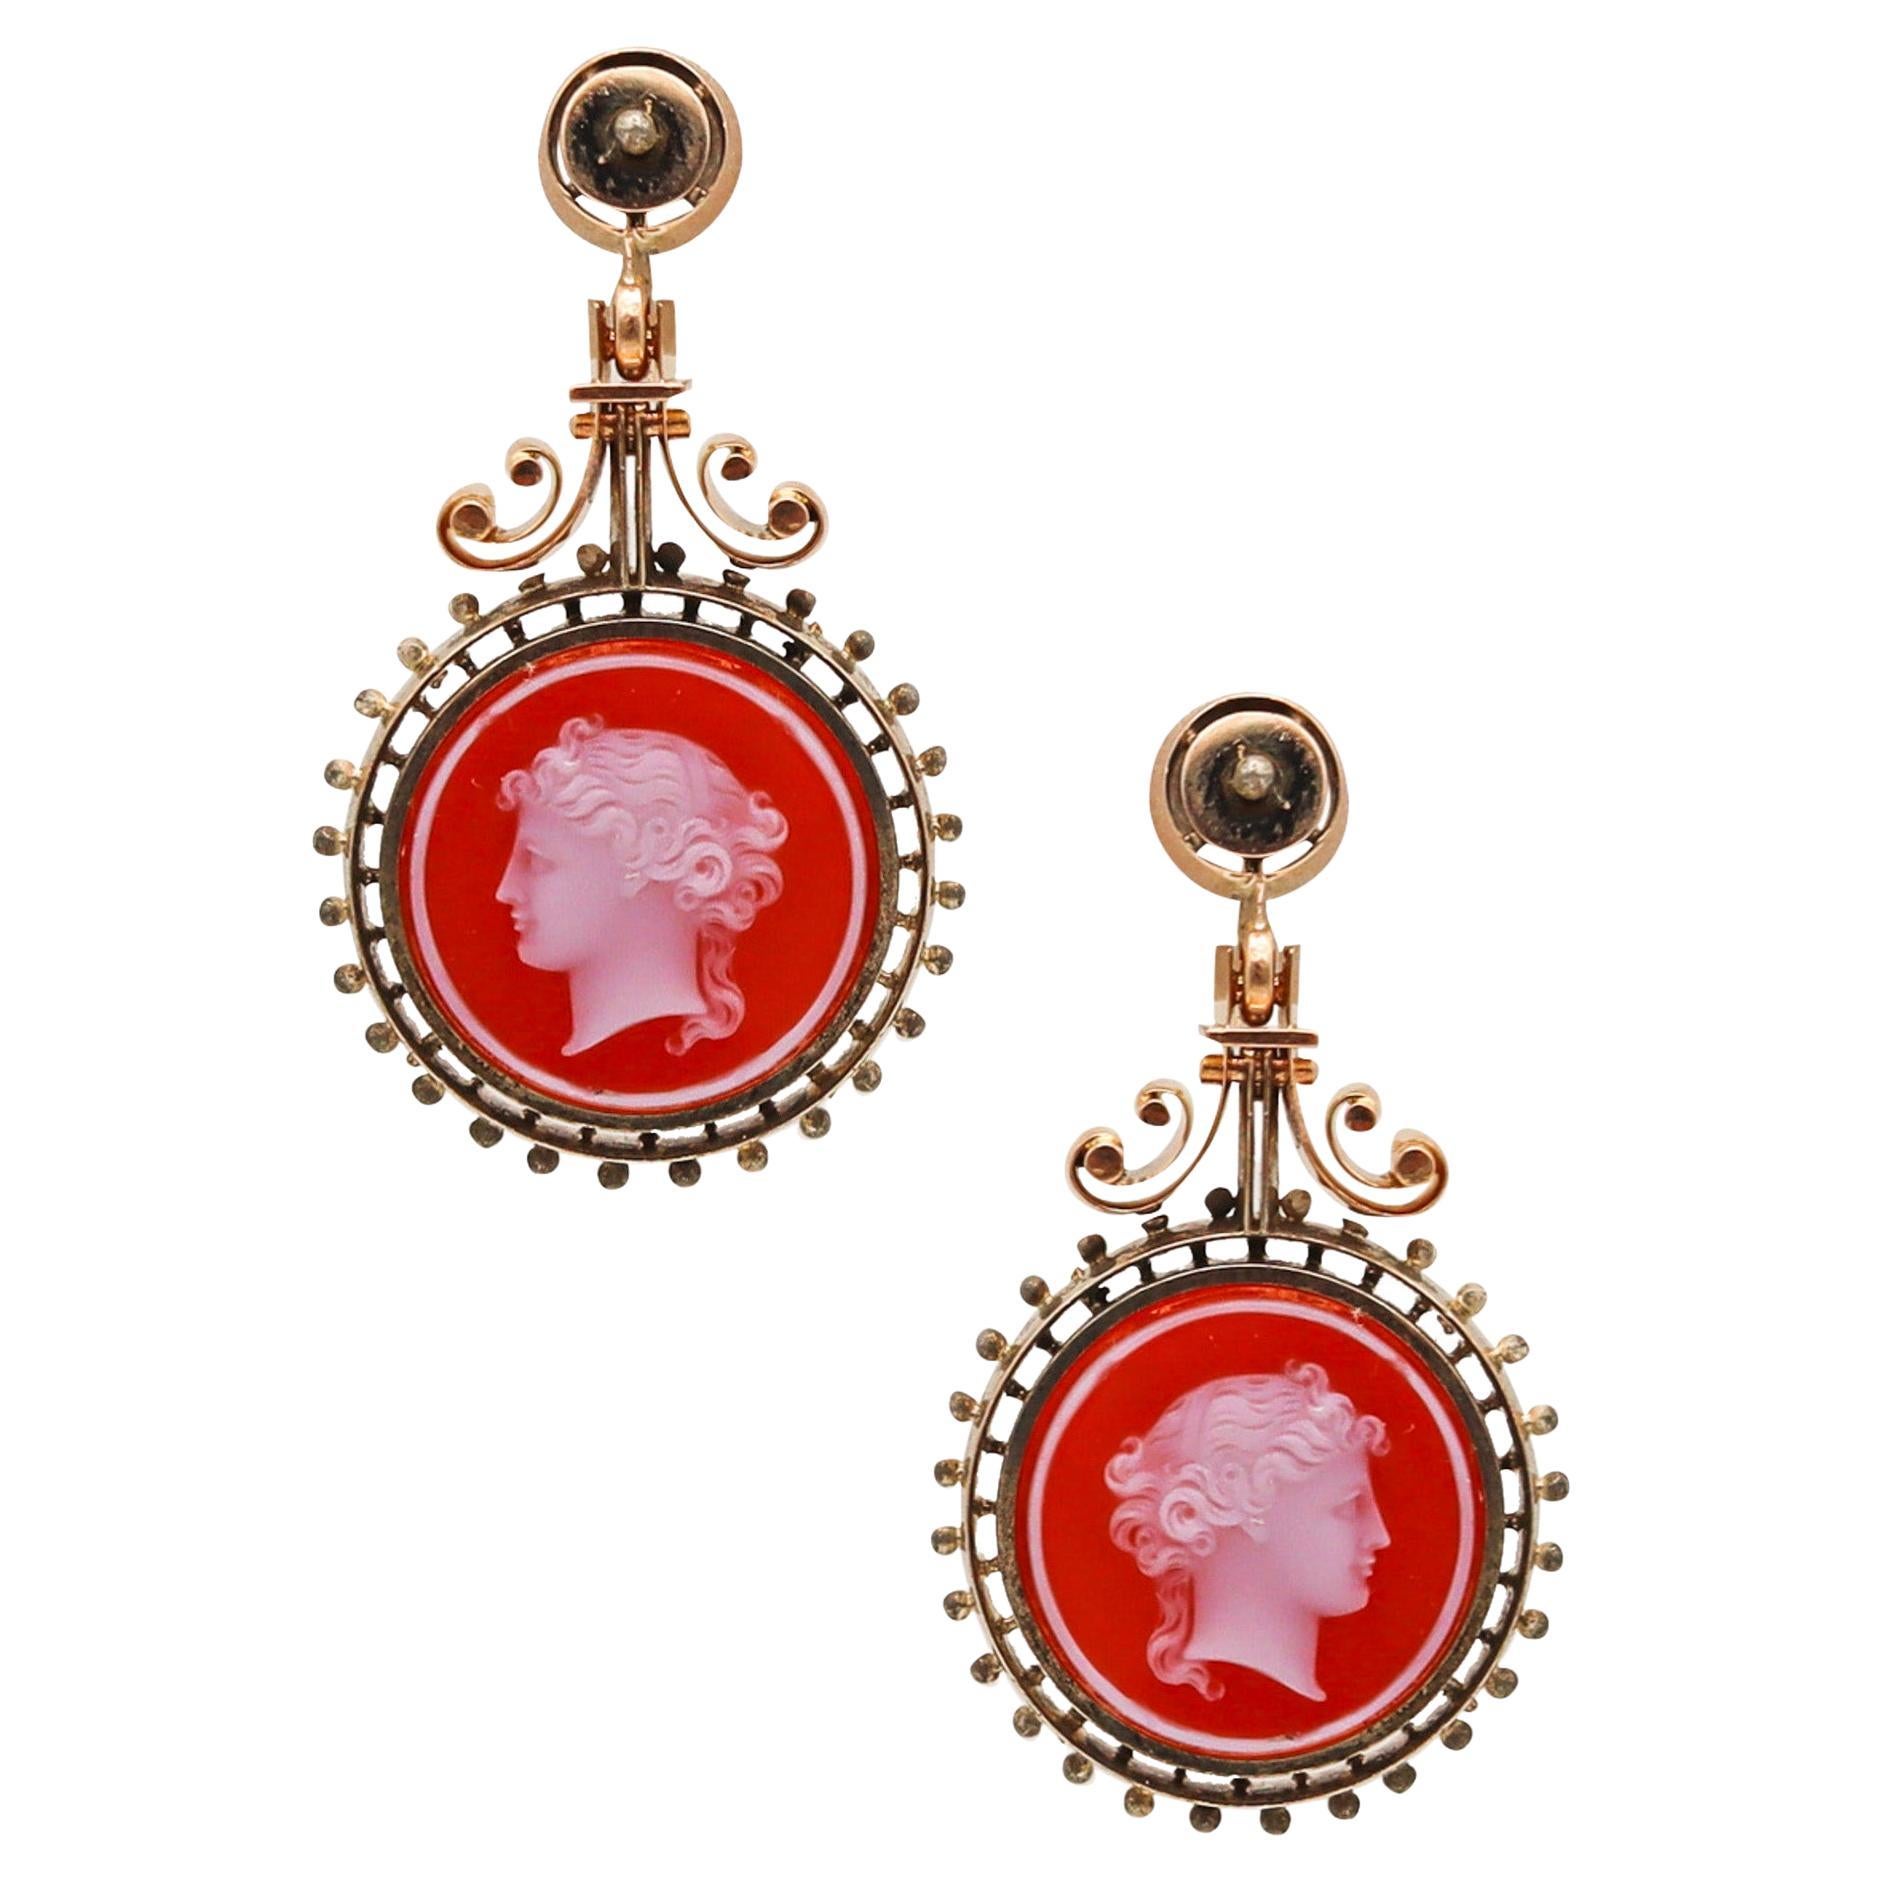 Victorian 1850 Etruscan Revival Dangle Drop Earrings 14Kt Gold & Agates Intaglio For Sale